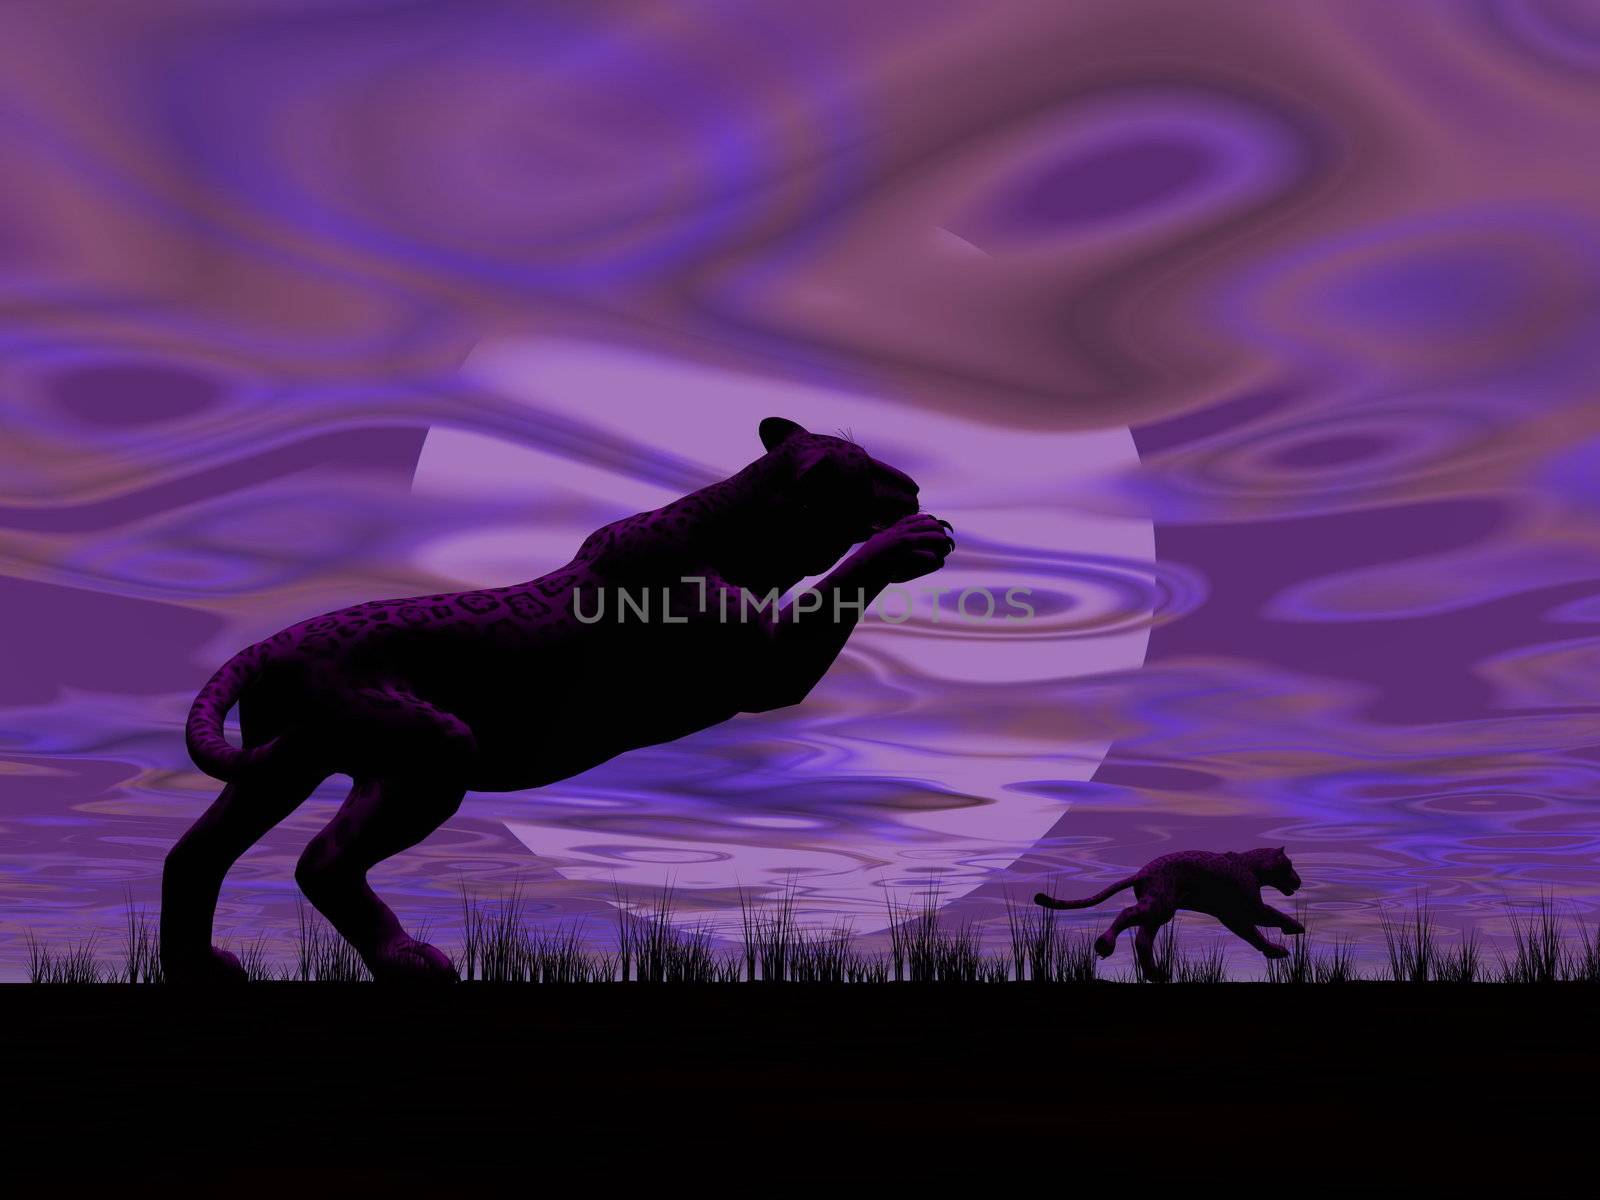 Shadow of a panther jumping under the full moon and another one running by violet night